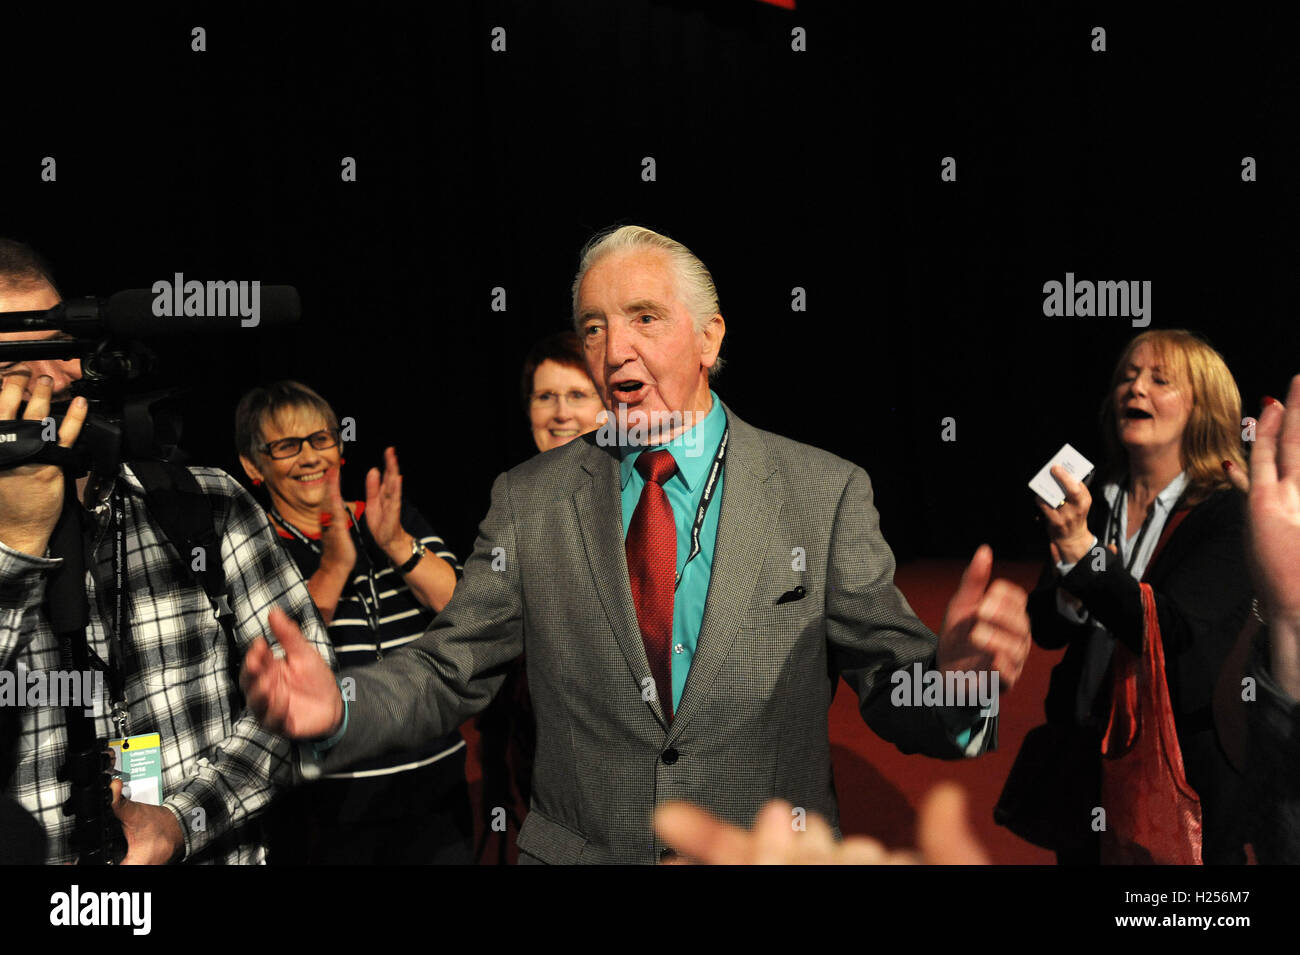 Liverpool, England. 24th September, 2016.  Jeremy Corbyn is announced as the new leader of the Labour Party at the ACC Conference Centre. Dennis Skinner mp talks to reporters of his support for Jeremy Corbyn. Mr CorbynÕs victory followed nine weeks of campaigning against fellow candidate, Owen Smith. This is his second leadership victory in just over twelve months and was initiated by the decision of Angela Eagle to stand against him. Kevin Hayes/Alamy Live News Stock Photo